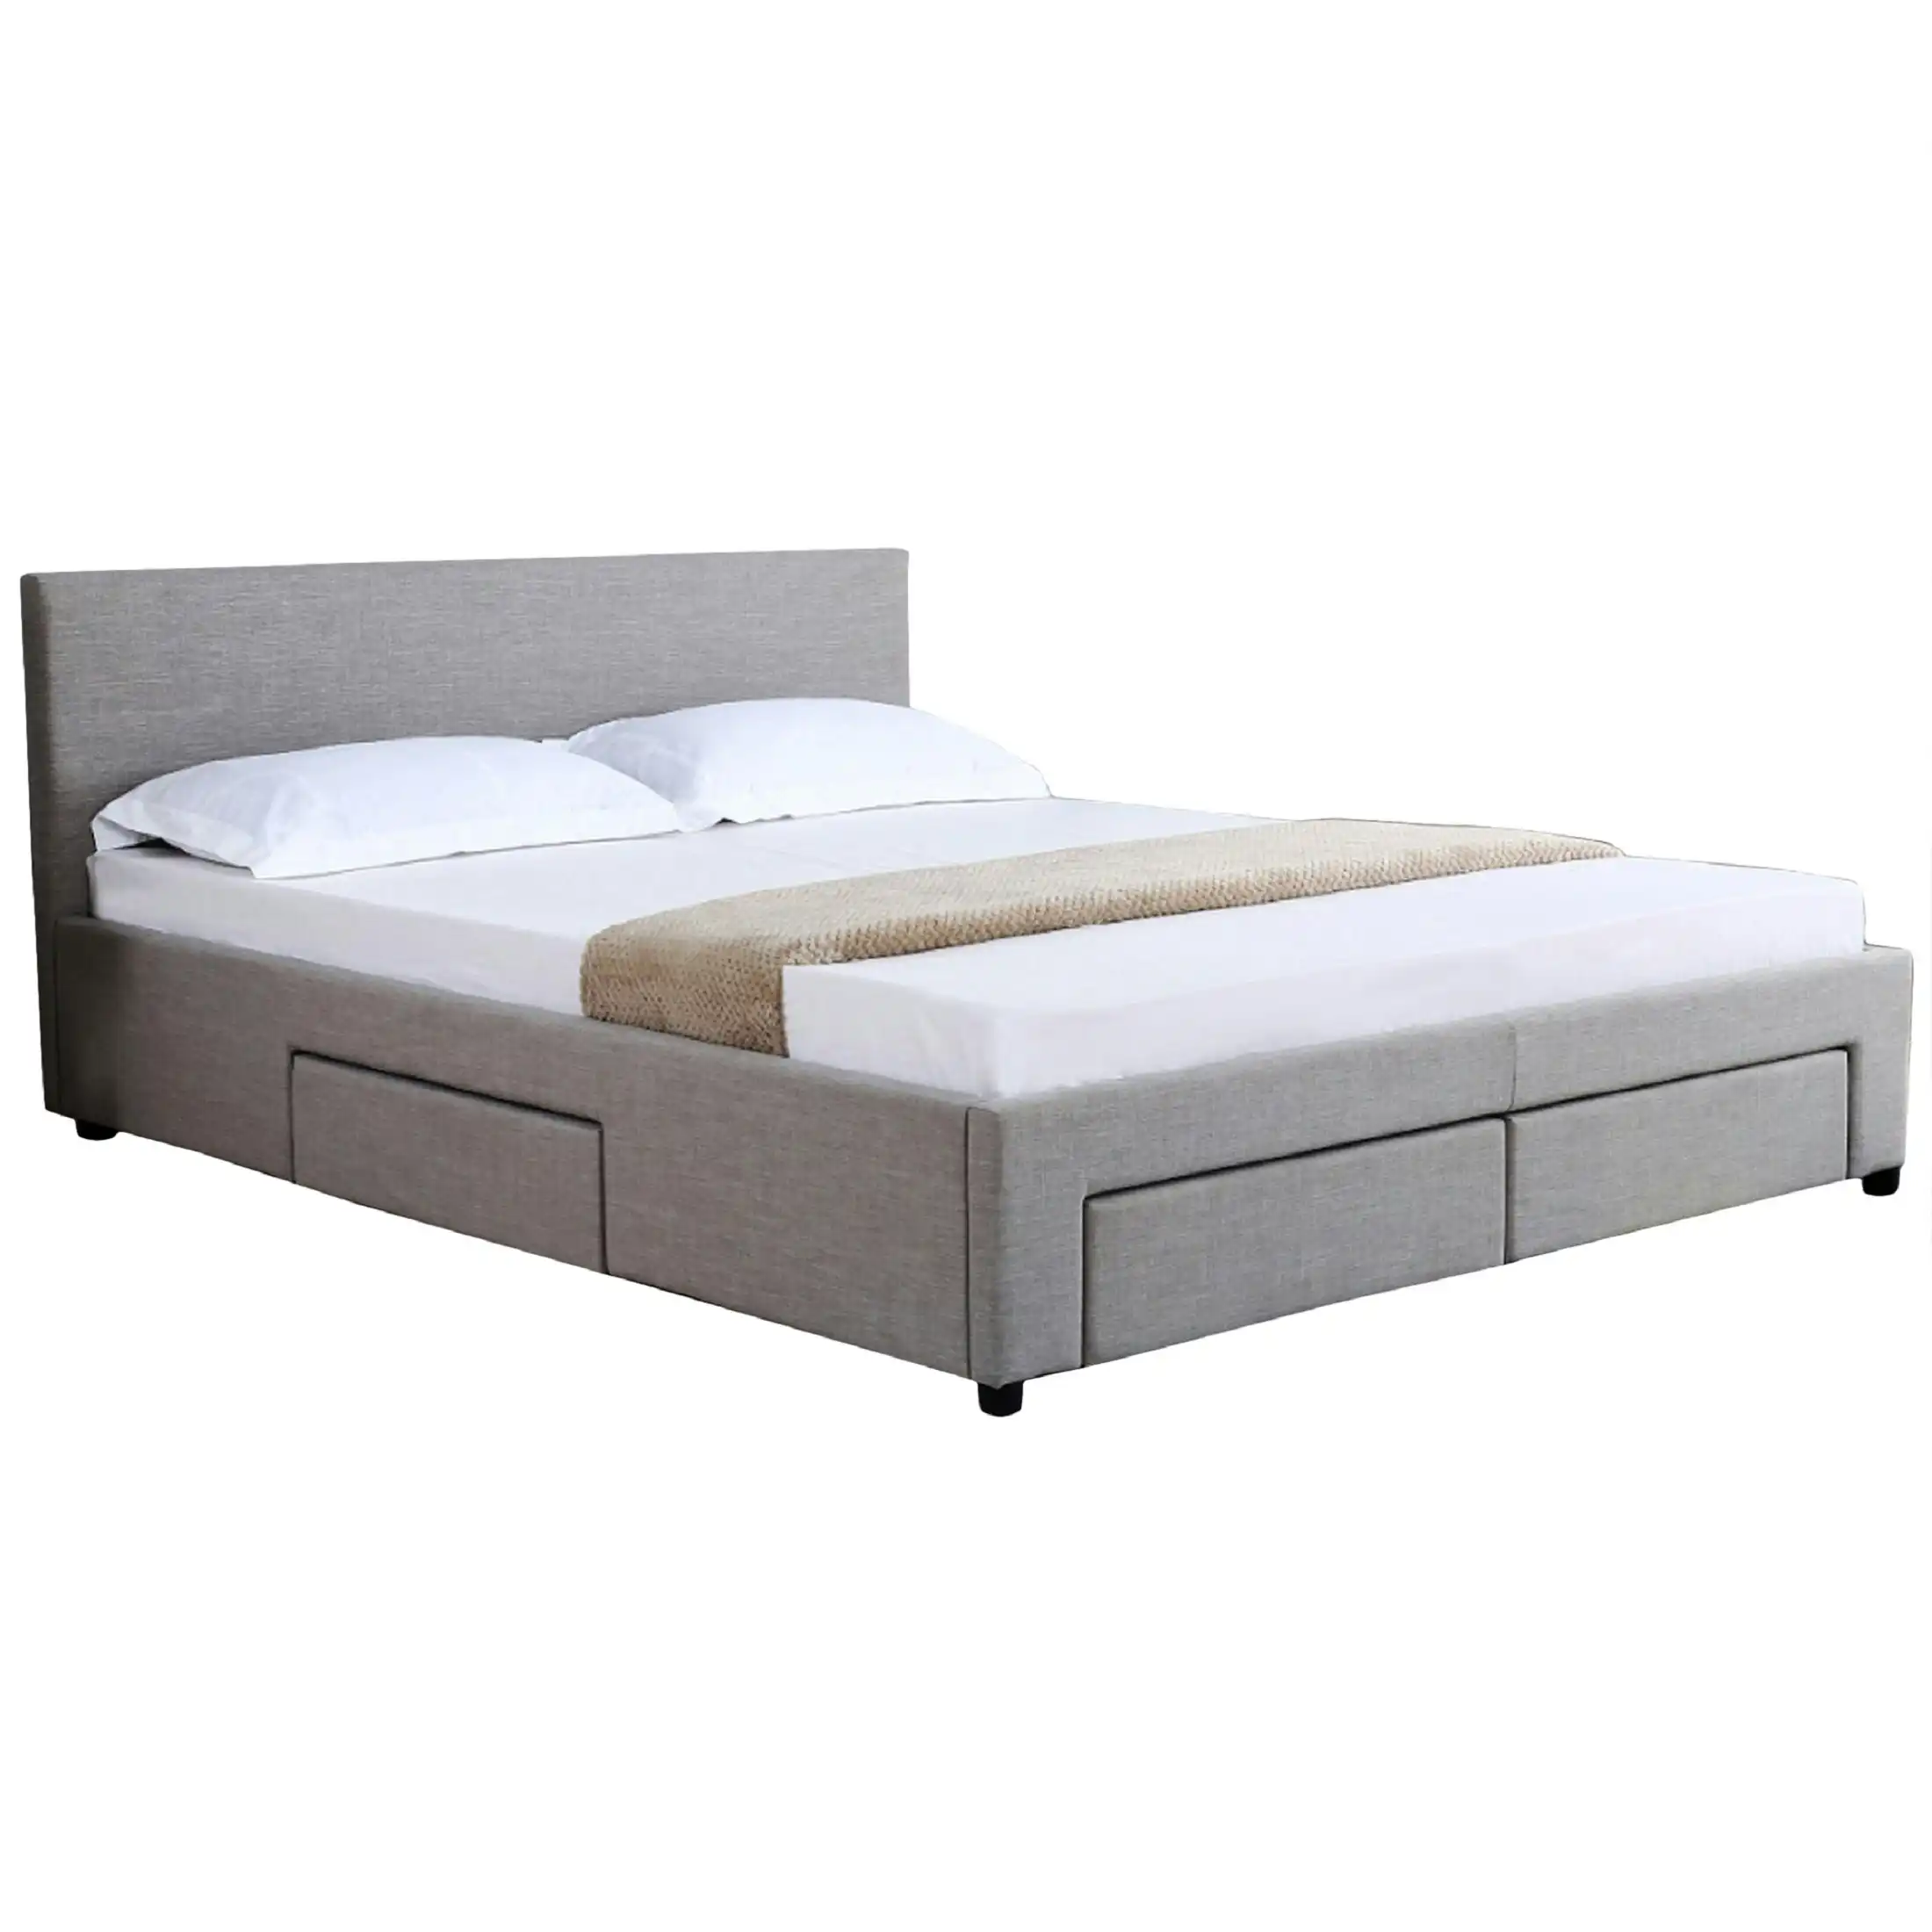 Nicola Double Bed with Drawers